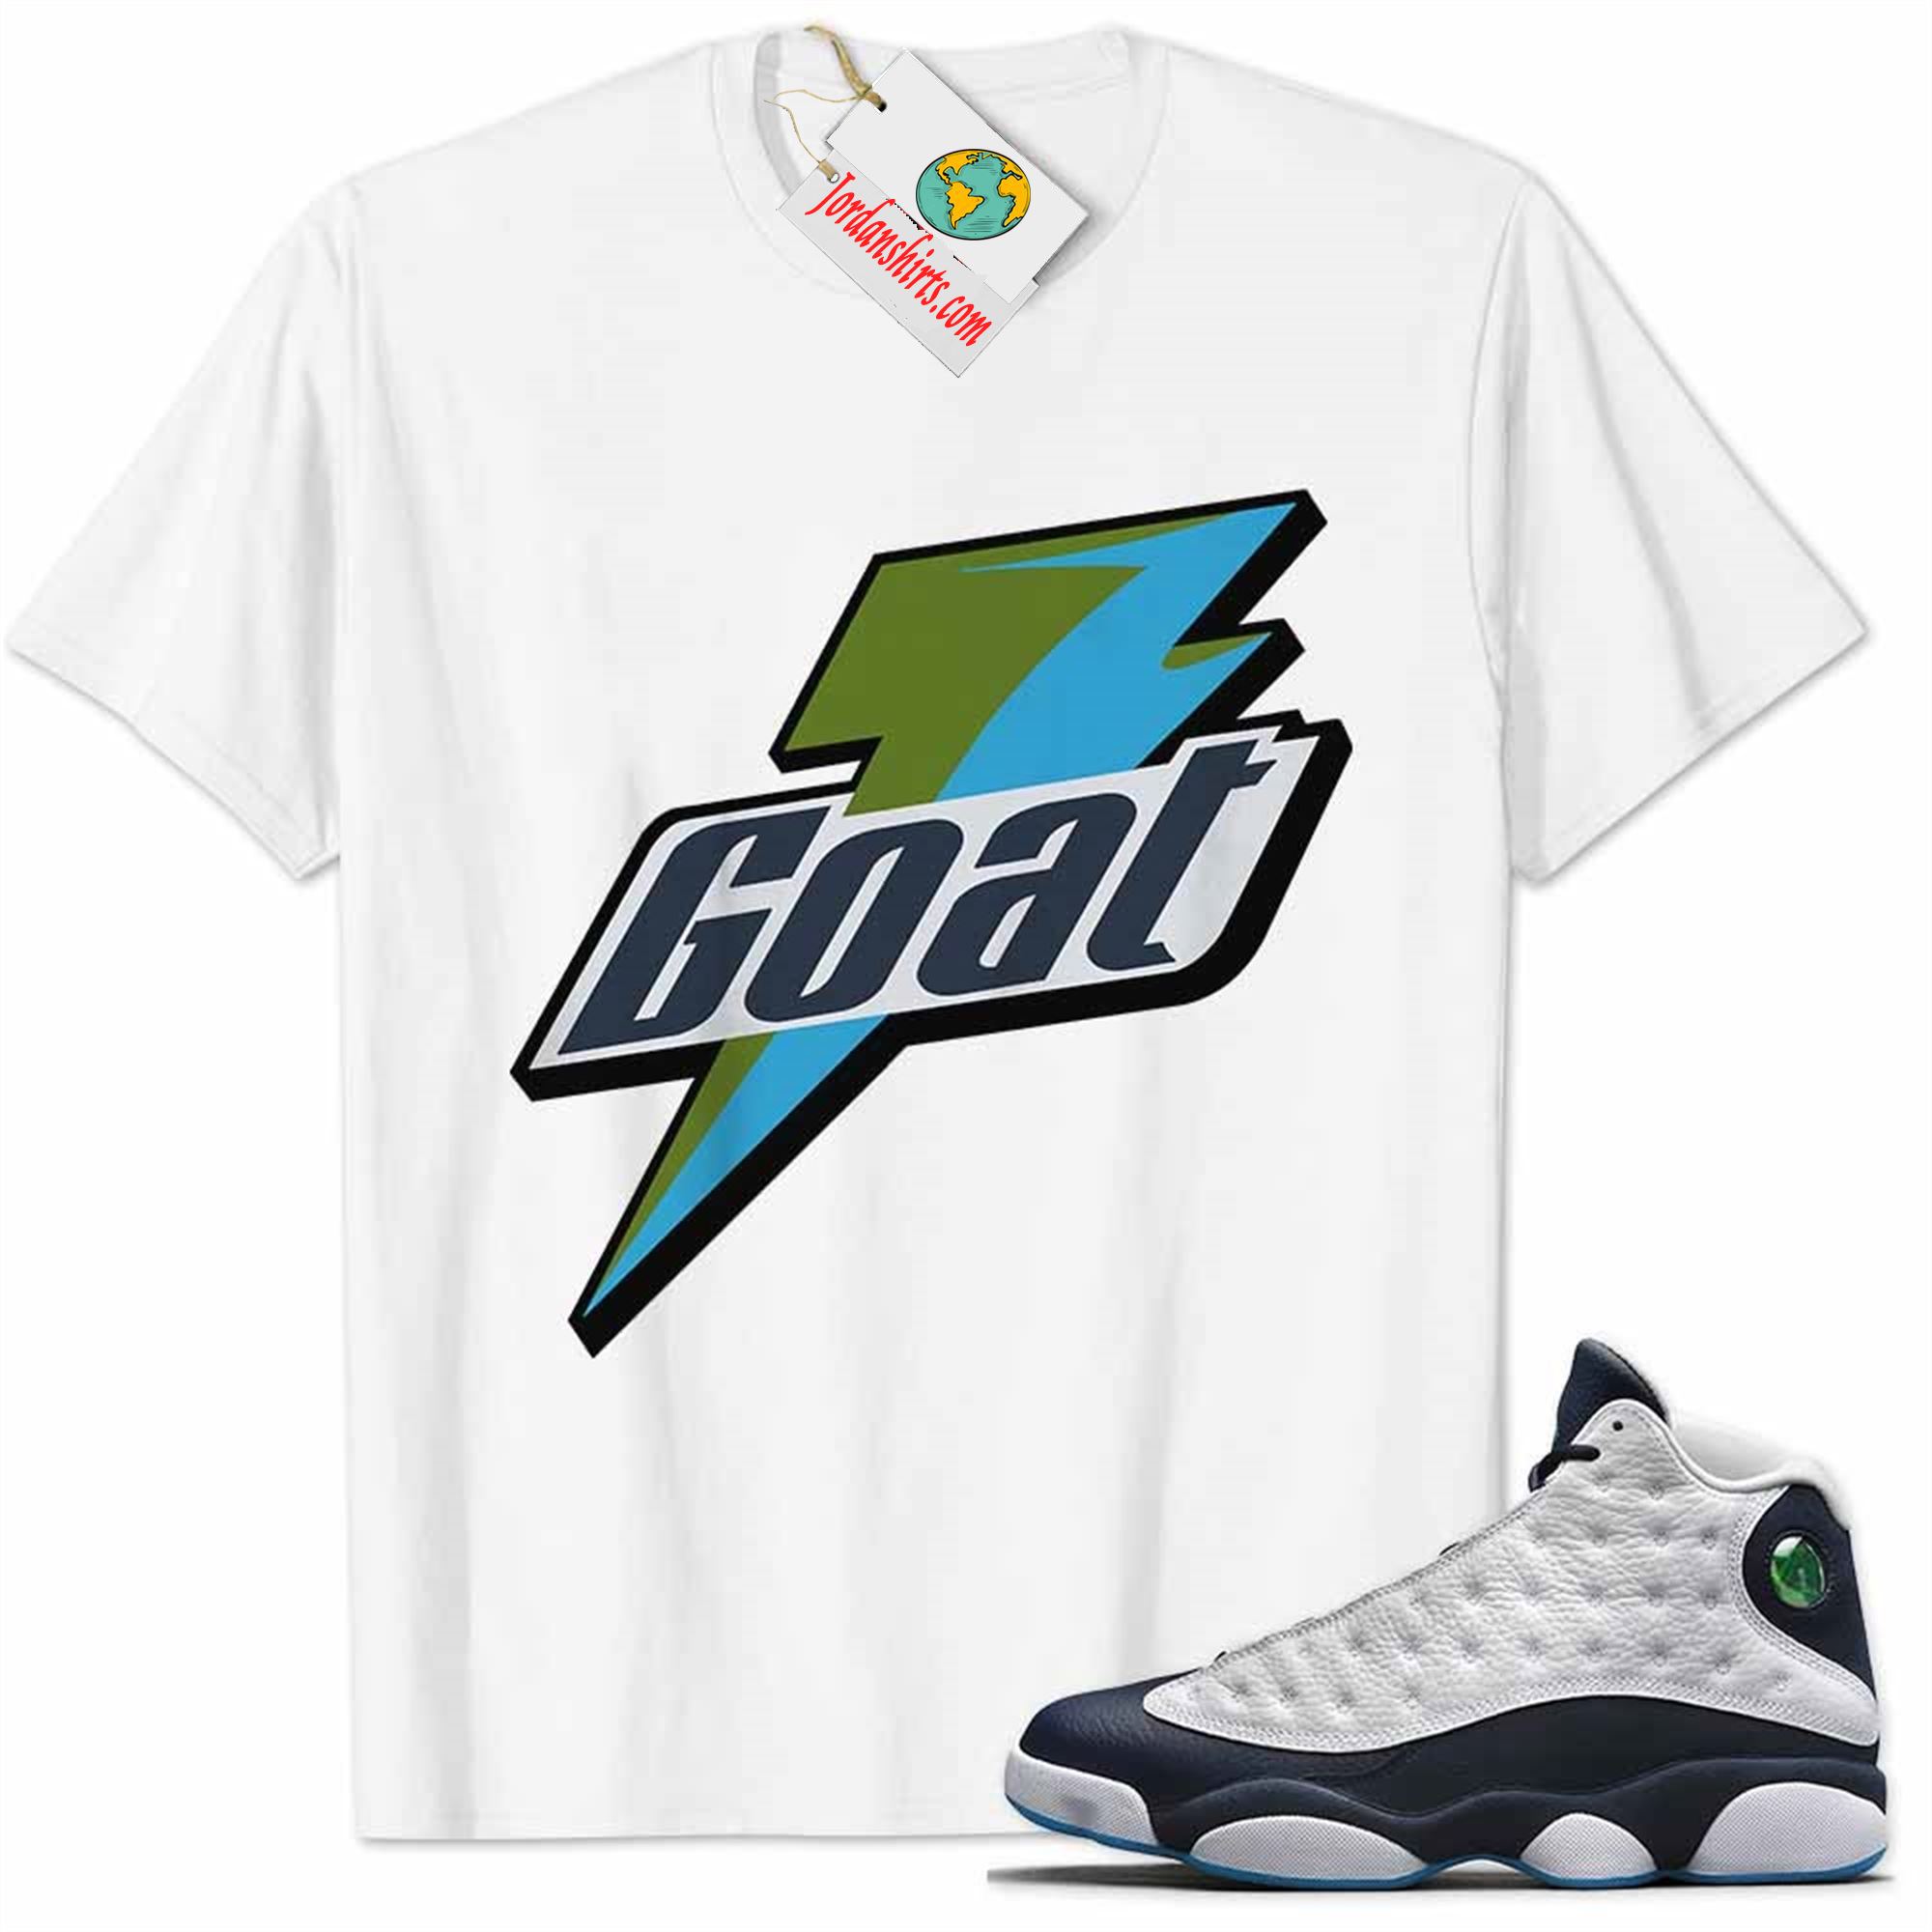 Jordan 13 Shirt, Obsidian 13s Shirt Goat Greatest Of All Time White Plus Size Up To 5xl